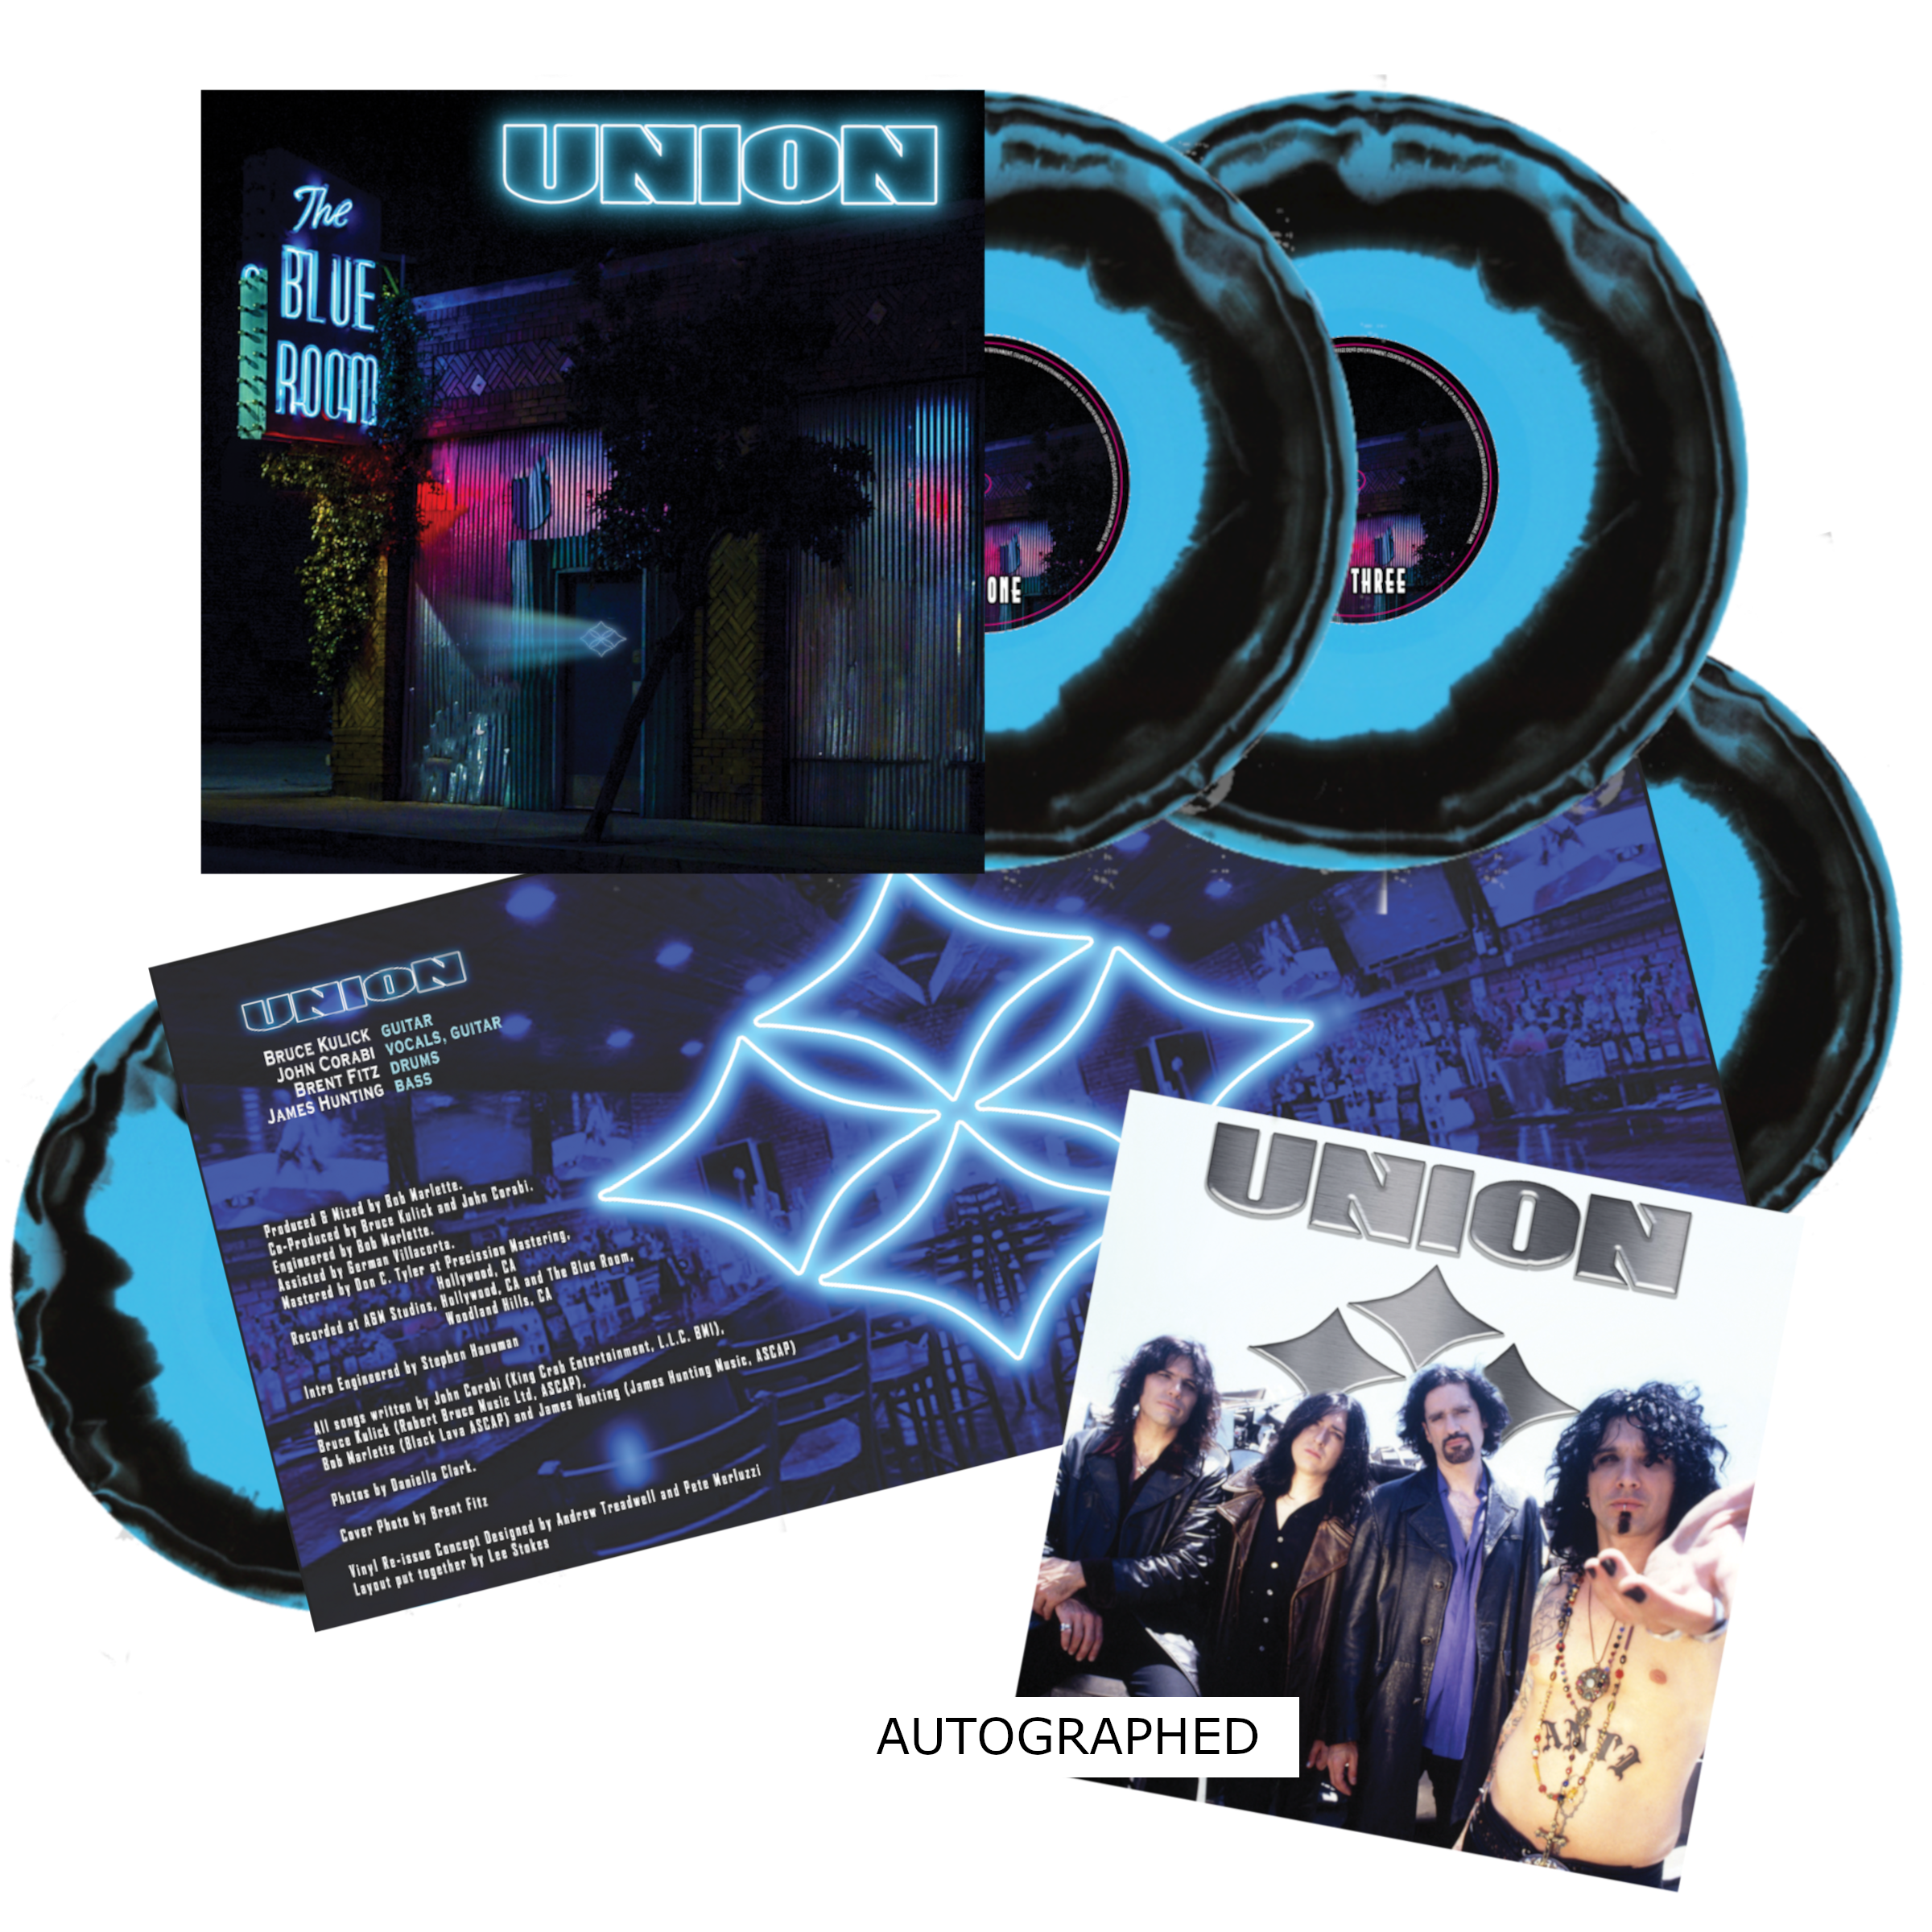 THE SELF-TITLED 'UNION' ALBUM AND 'THE BLUE ROOM' ON LIMITED EDITION VINYL